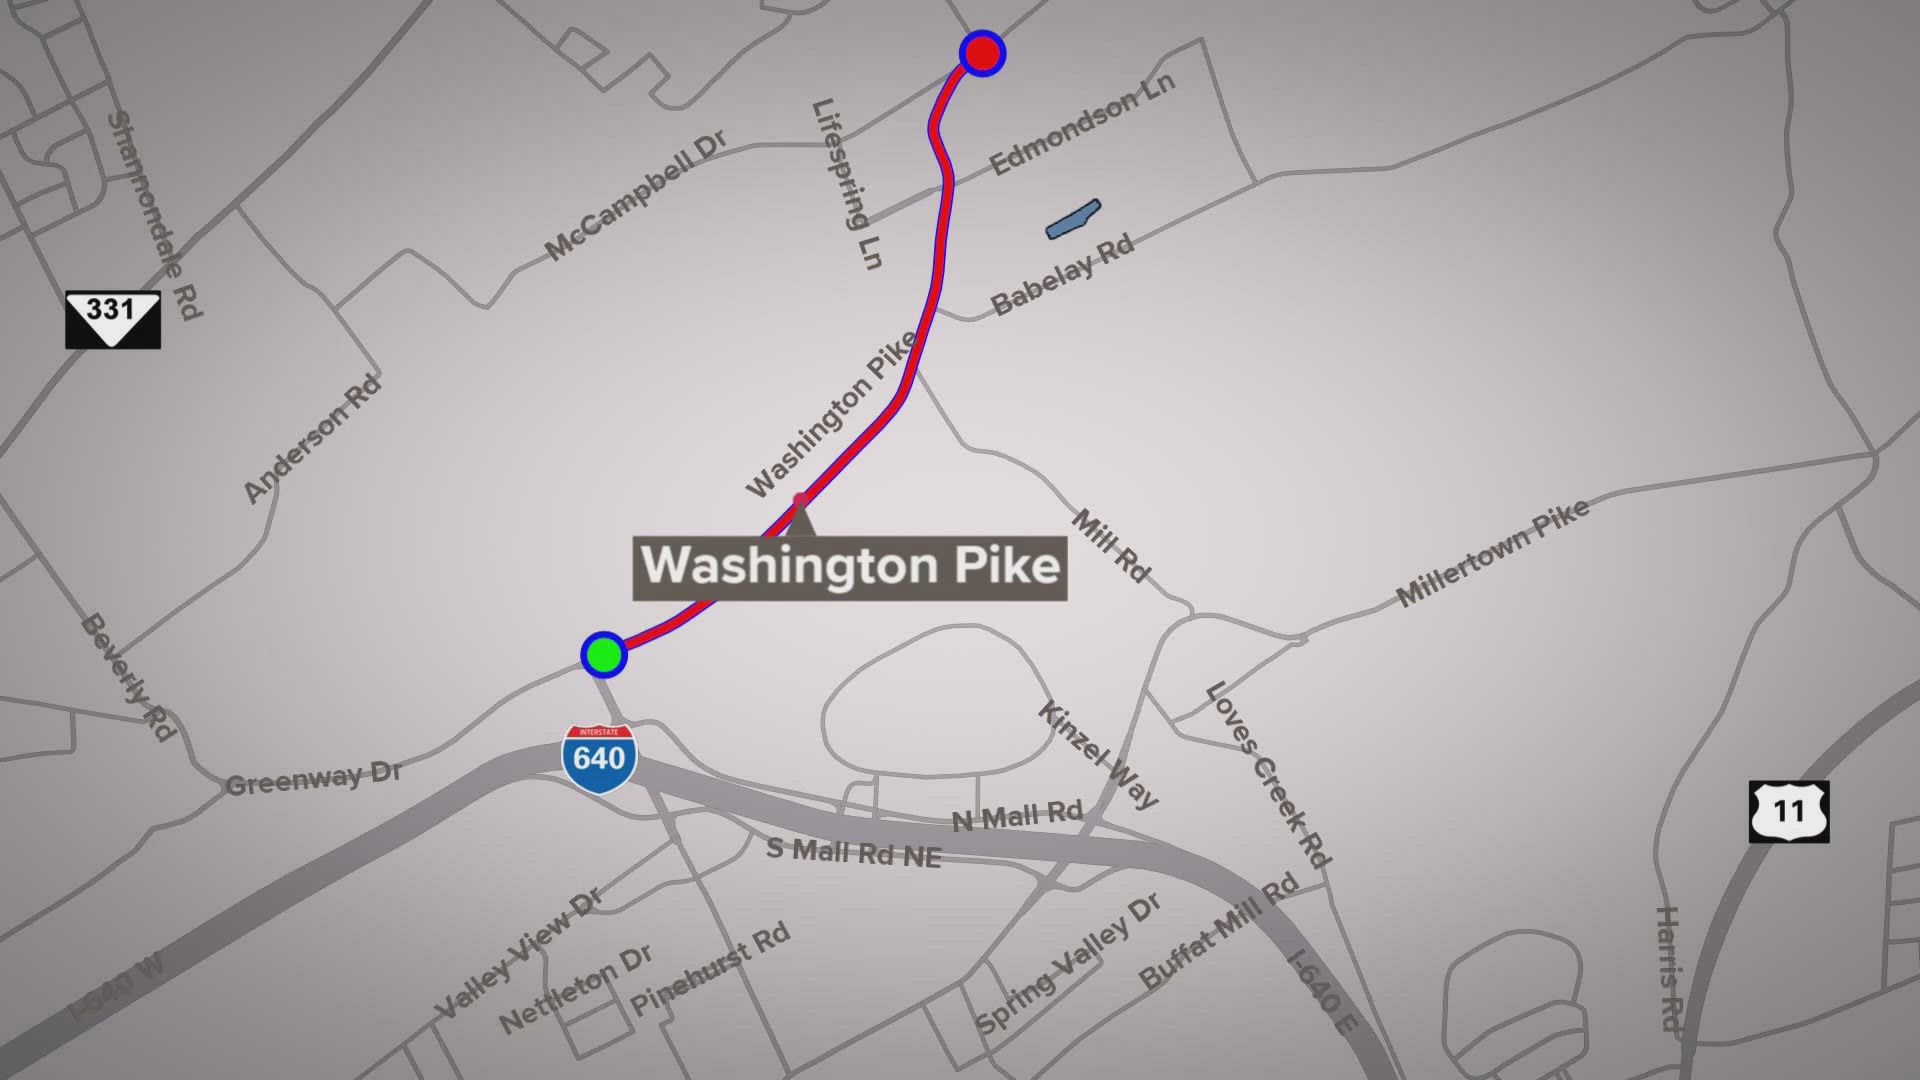 The city received approval to begin acquiring rights of way to redesign Washington Pike between I-640 and Murphy Road.